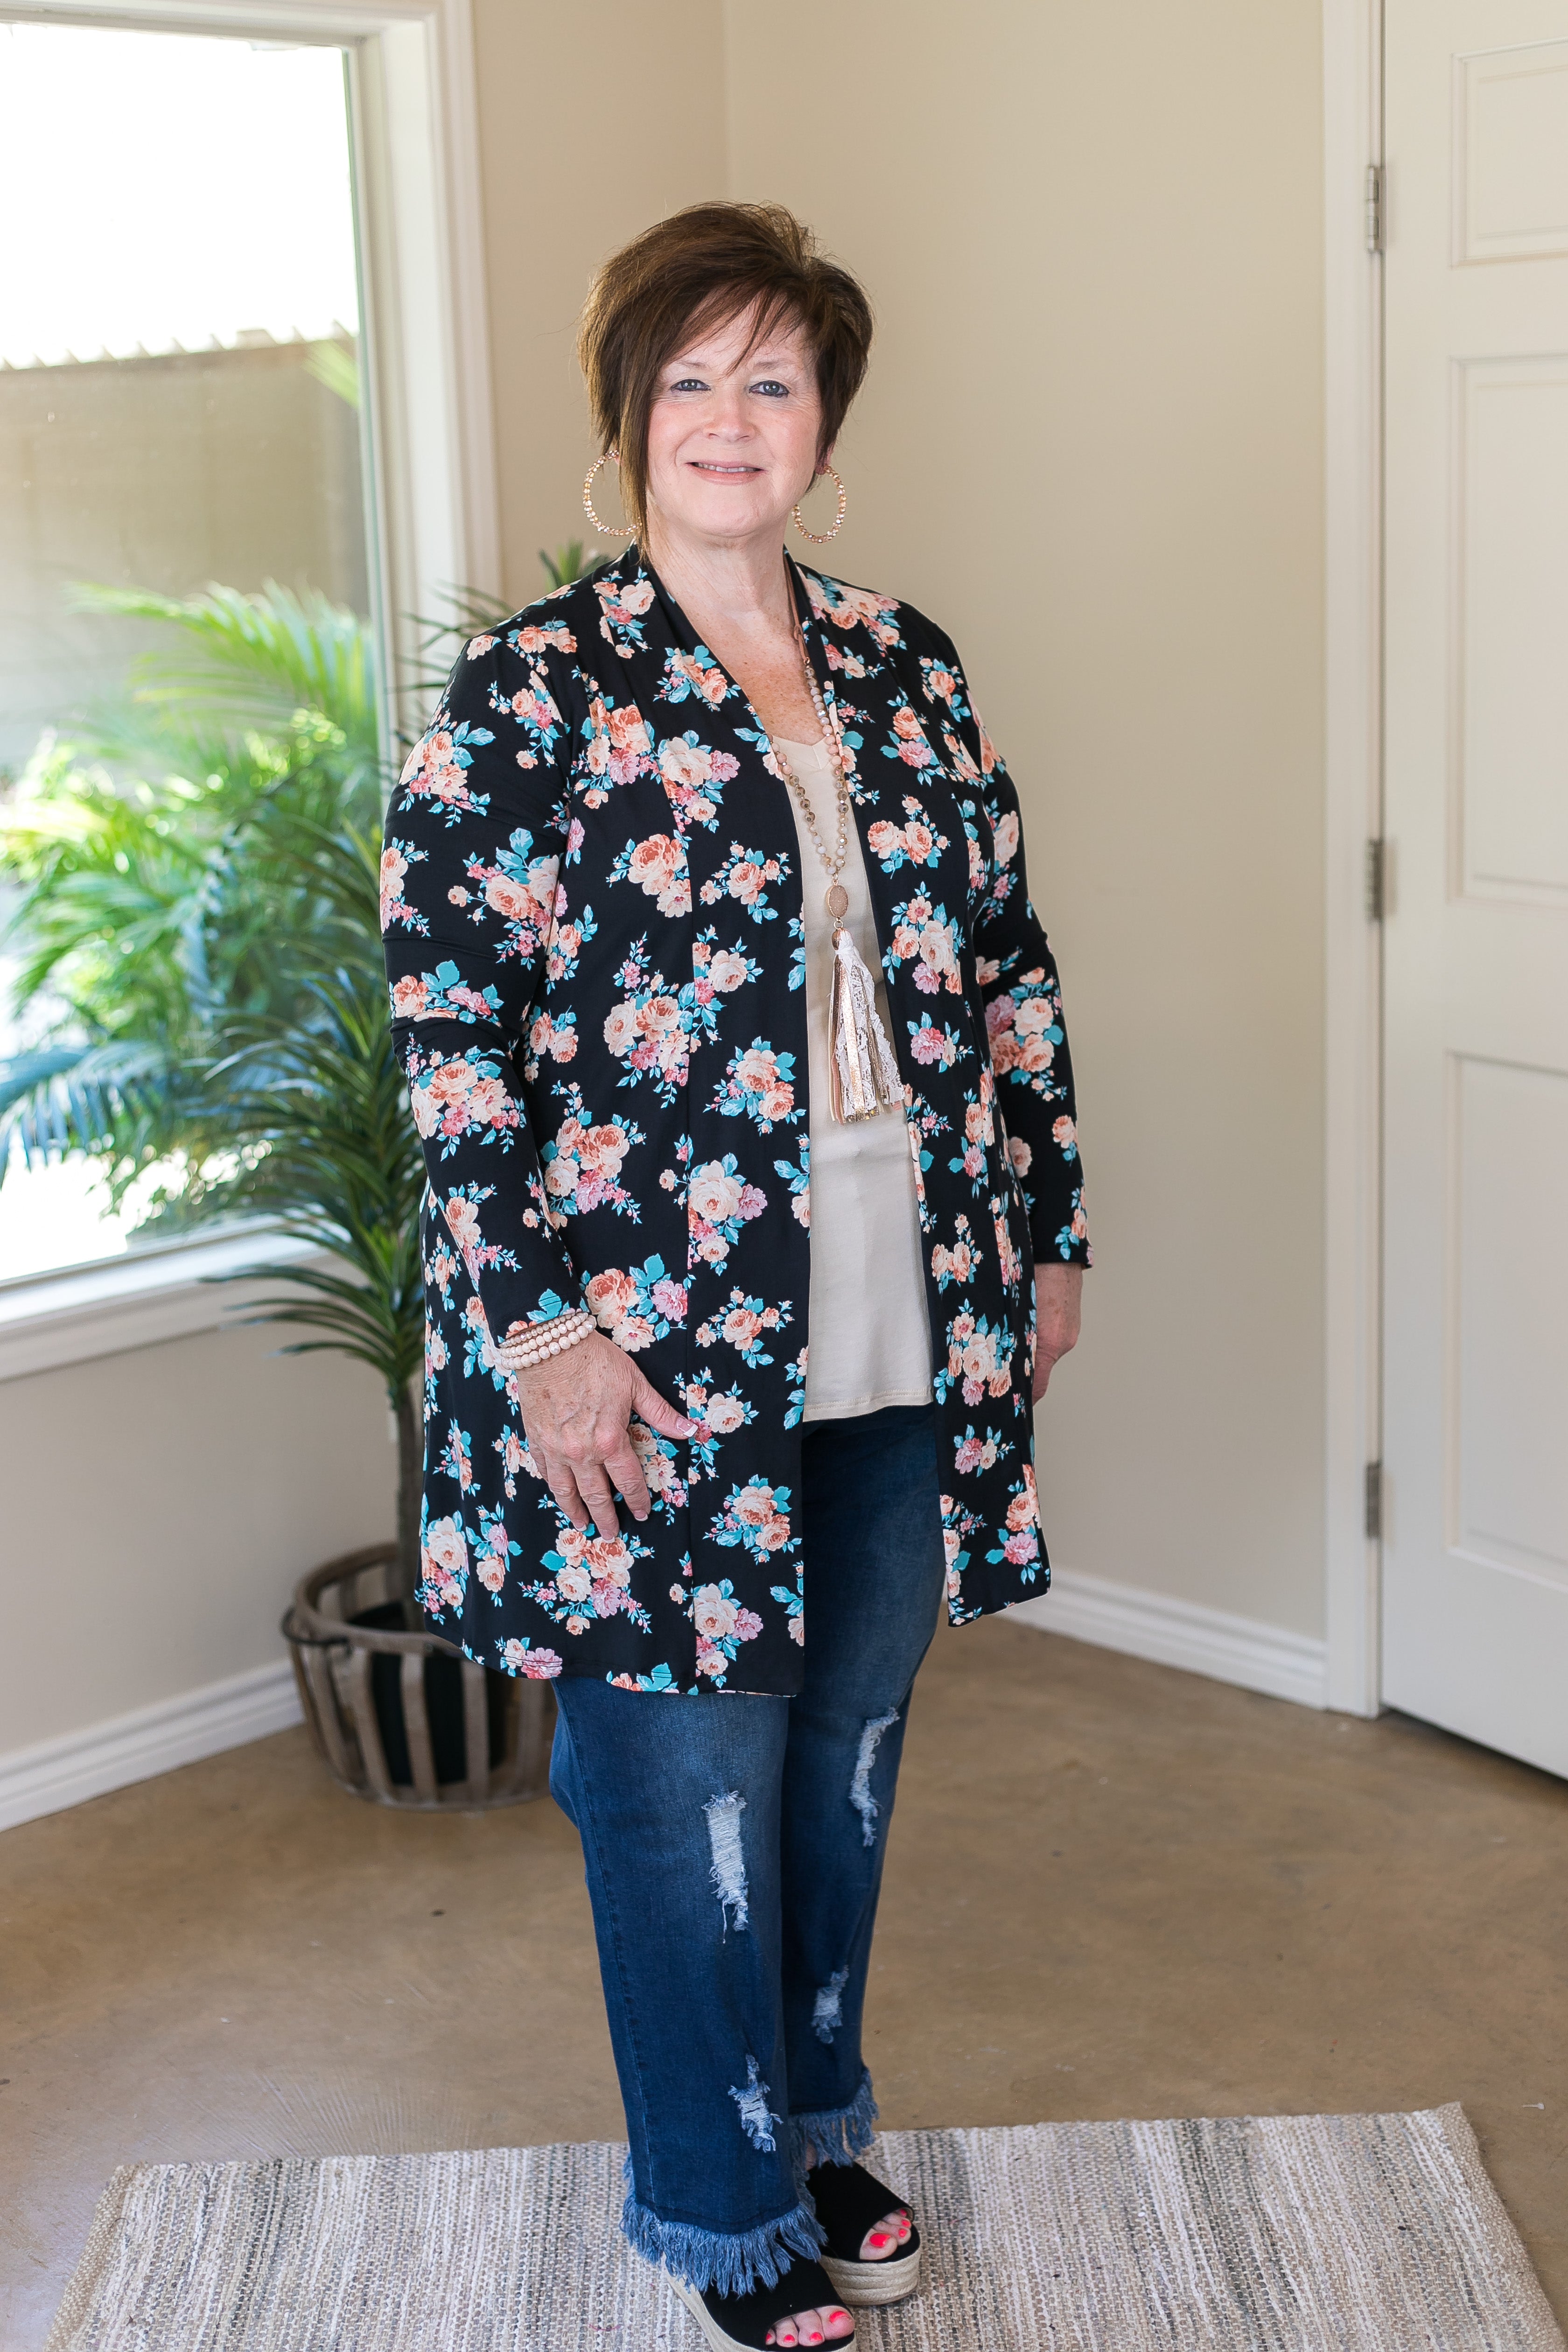 Garden Party Floral Print Super Soft Cardigan in Black - Giddy Up Glamour Boutique